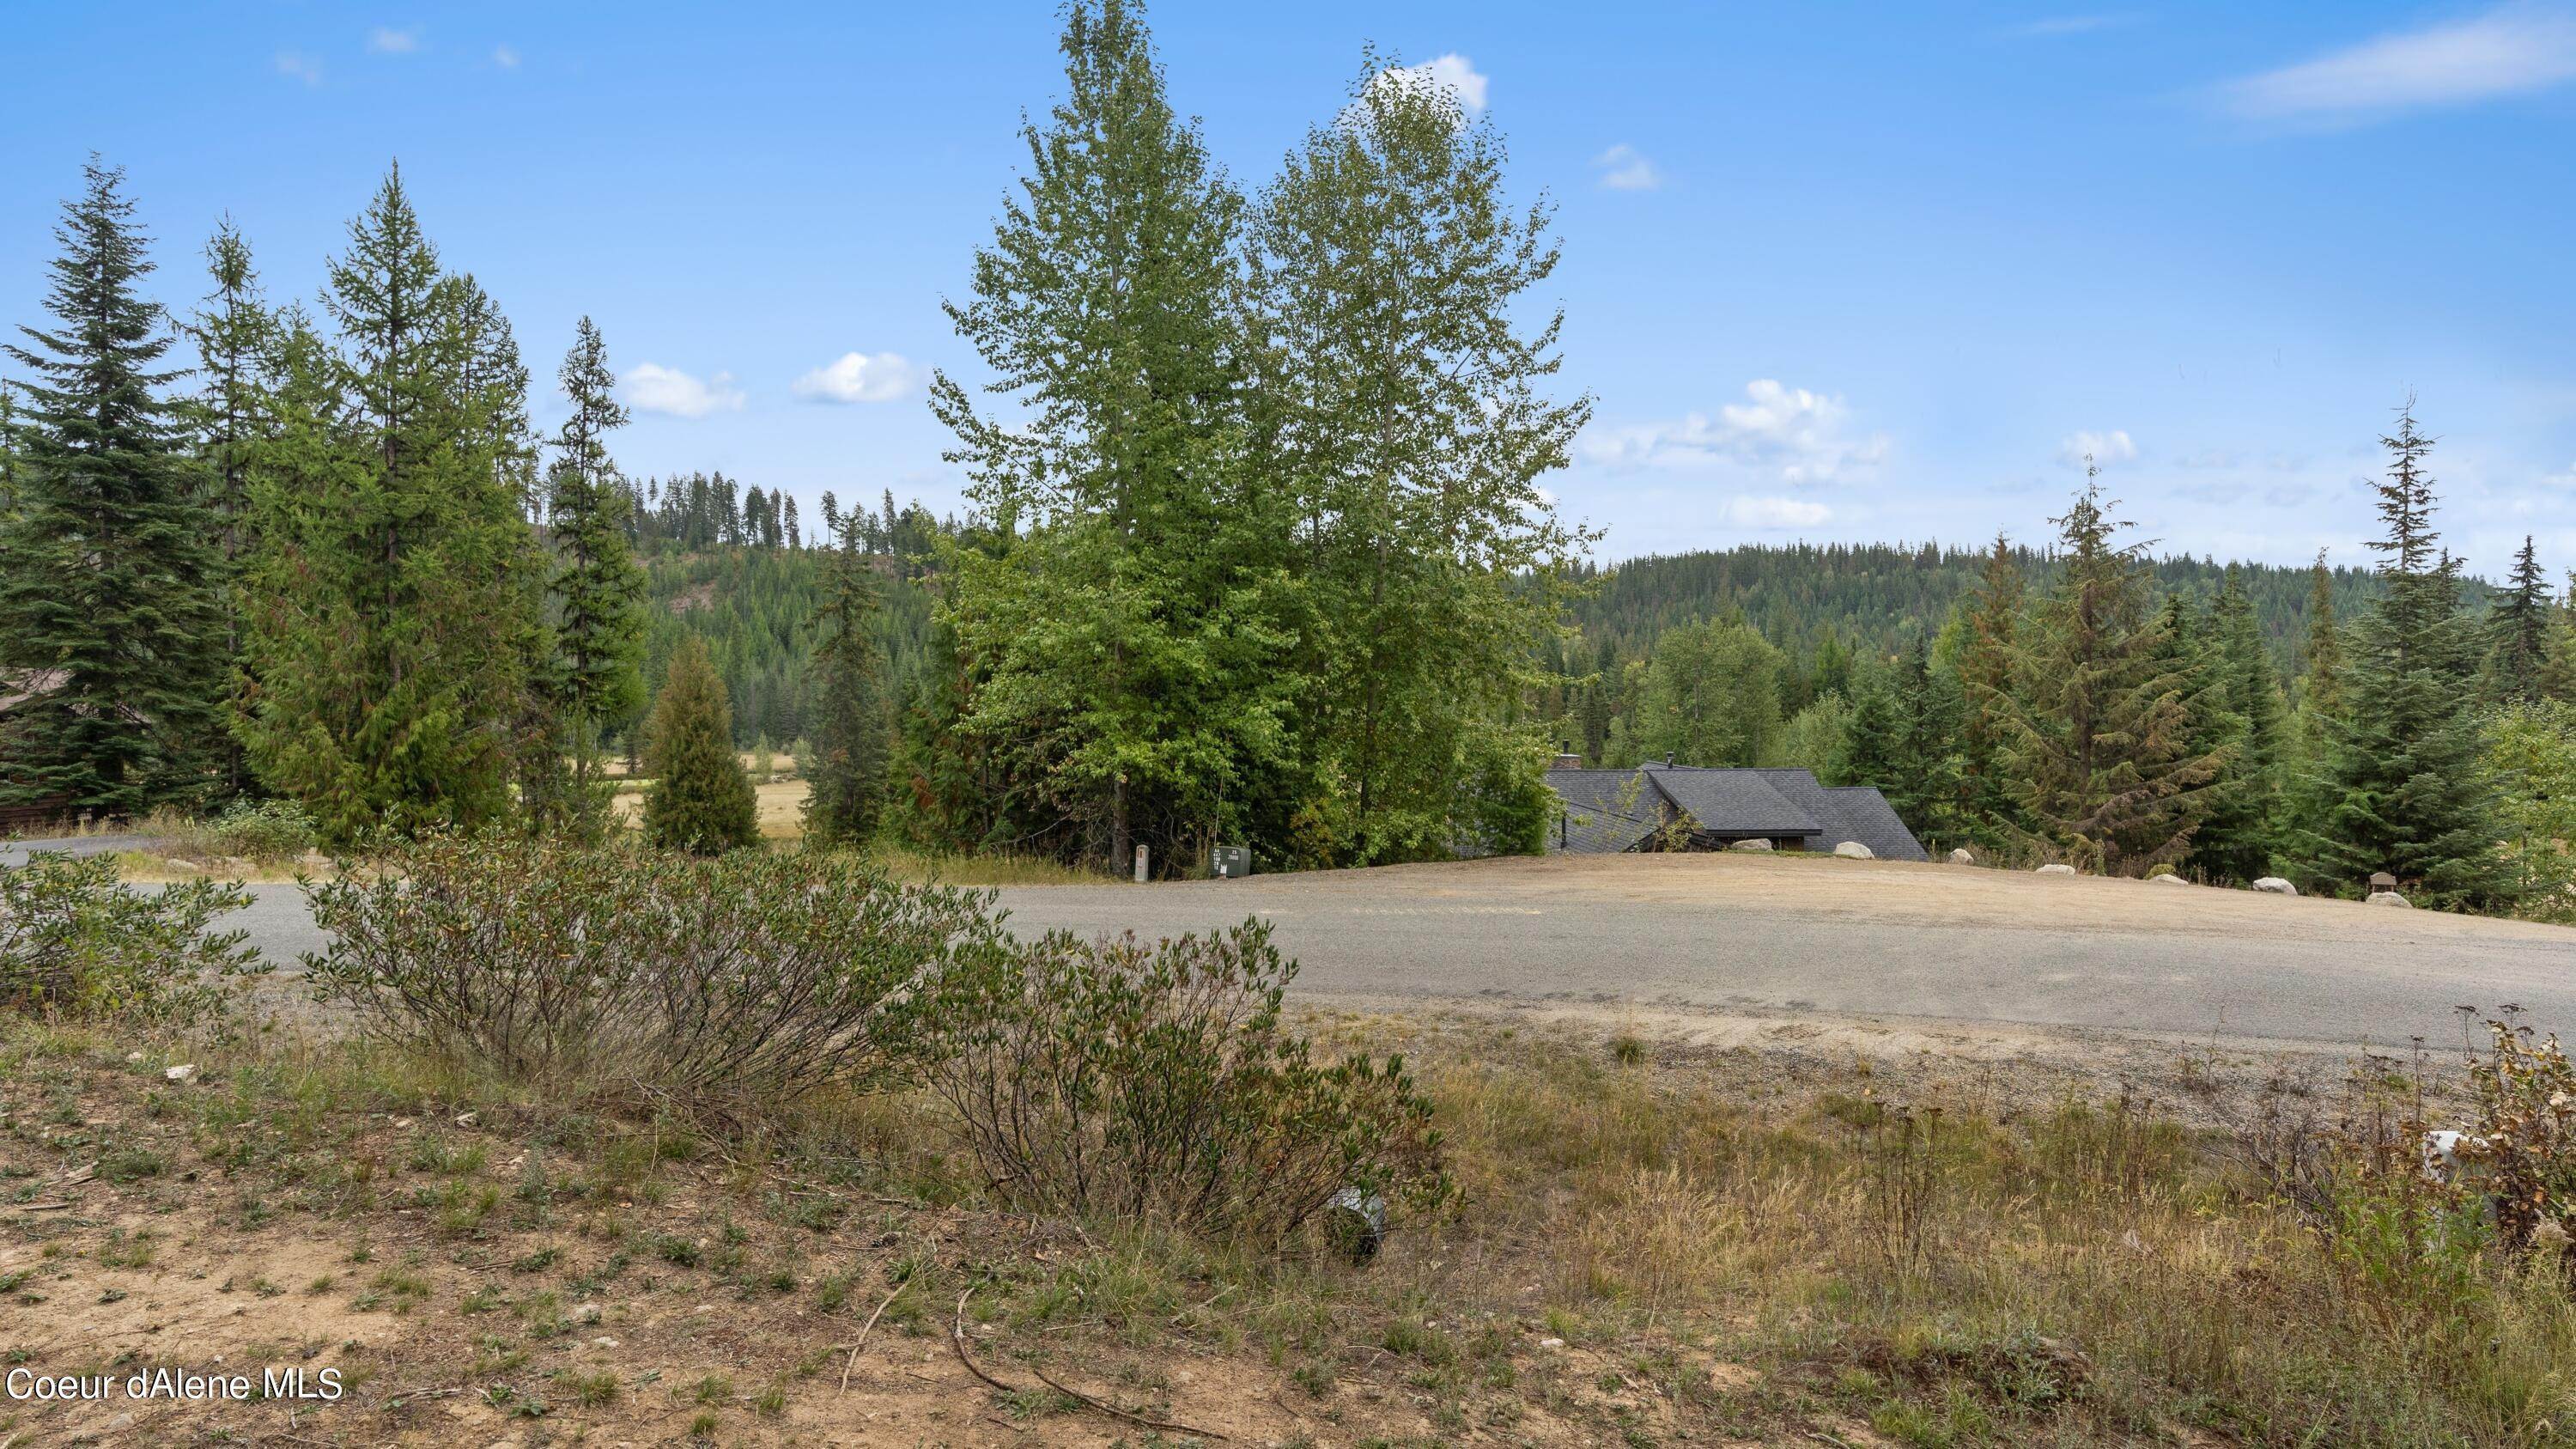 11. Land for Sale at Blk 13 Lots 1&2 Long Drive Priest Lake, Idaho 83856 United States